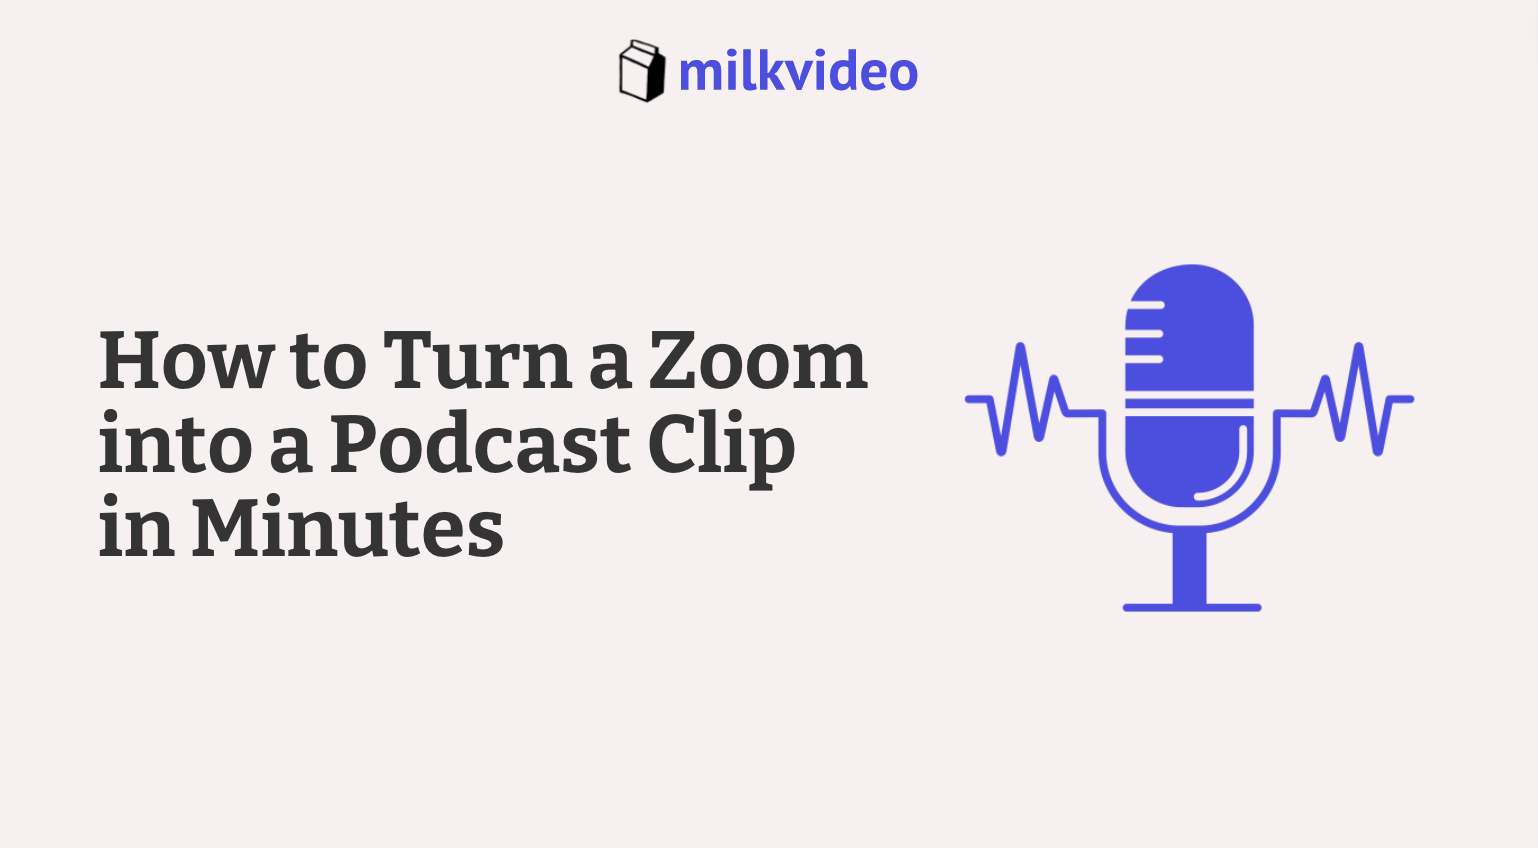 How to Turn a Zoom into a Podcast Clip in Minutes